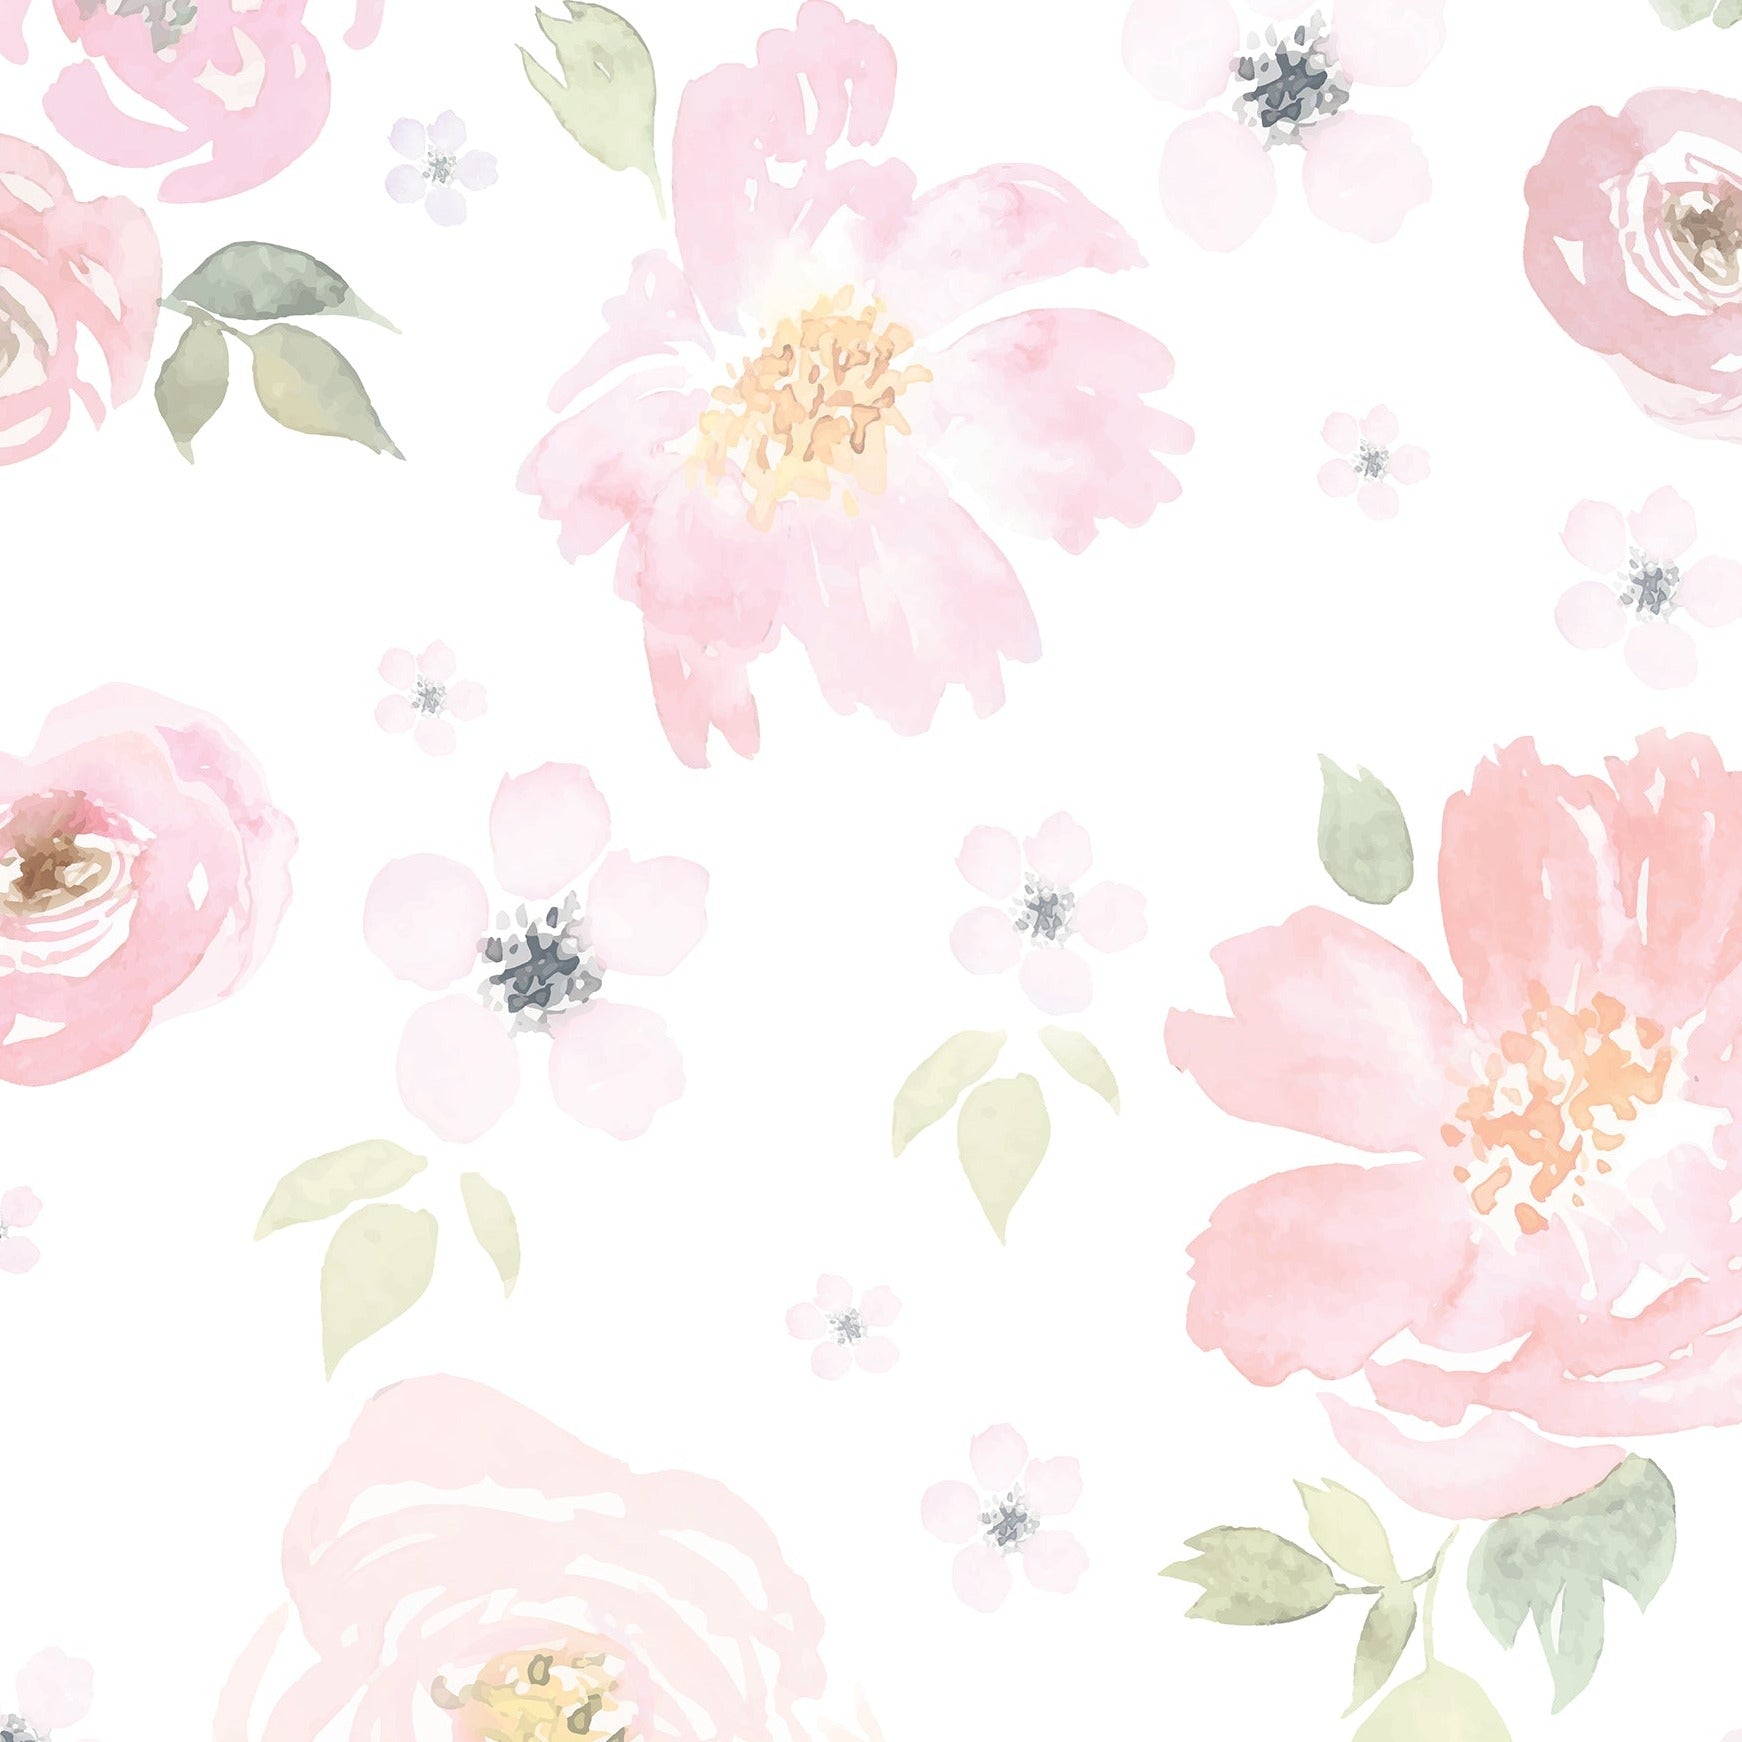 A seamless pattern of the 'Gentle Blossom Wallpaper', displaying watercolor blooms in shades of pink and green, conveying a delicate and airy feel, perfect for a light-filled interior space.